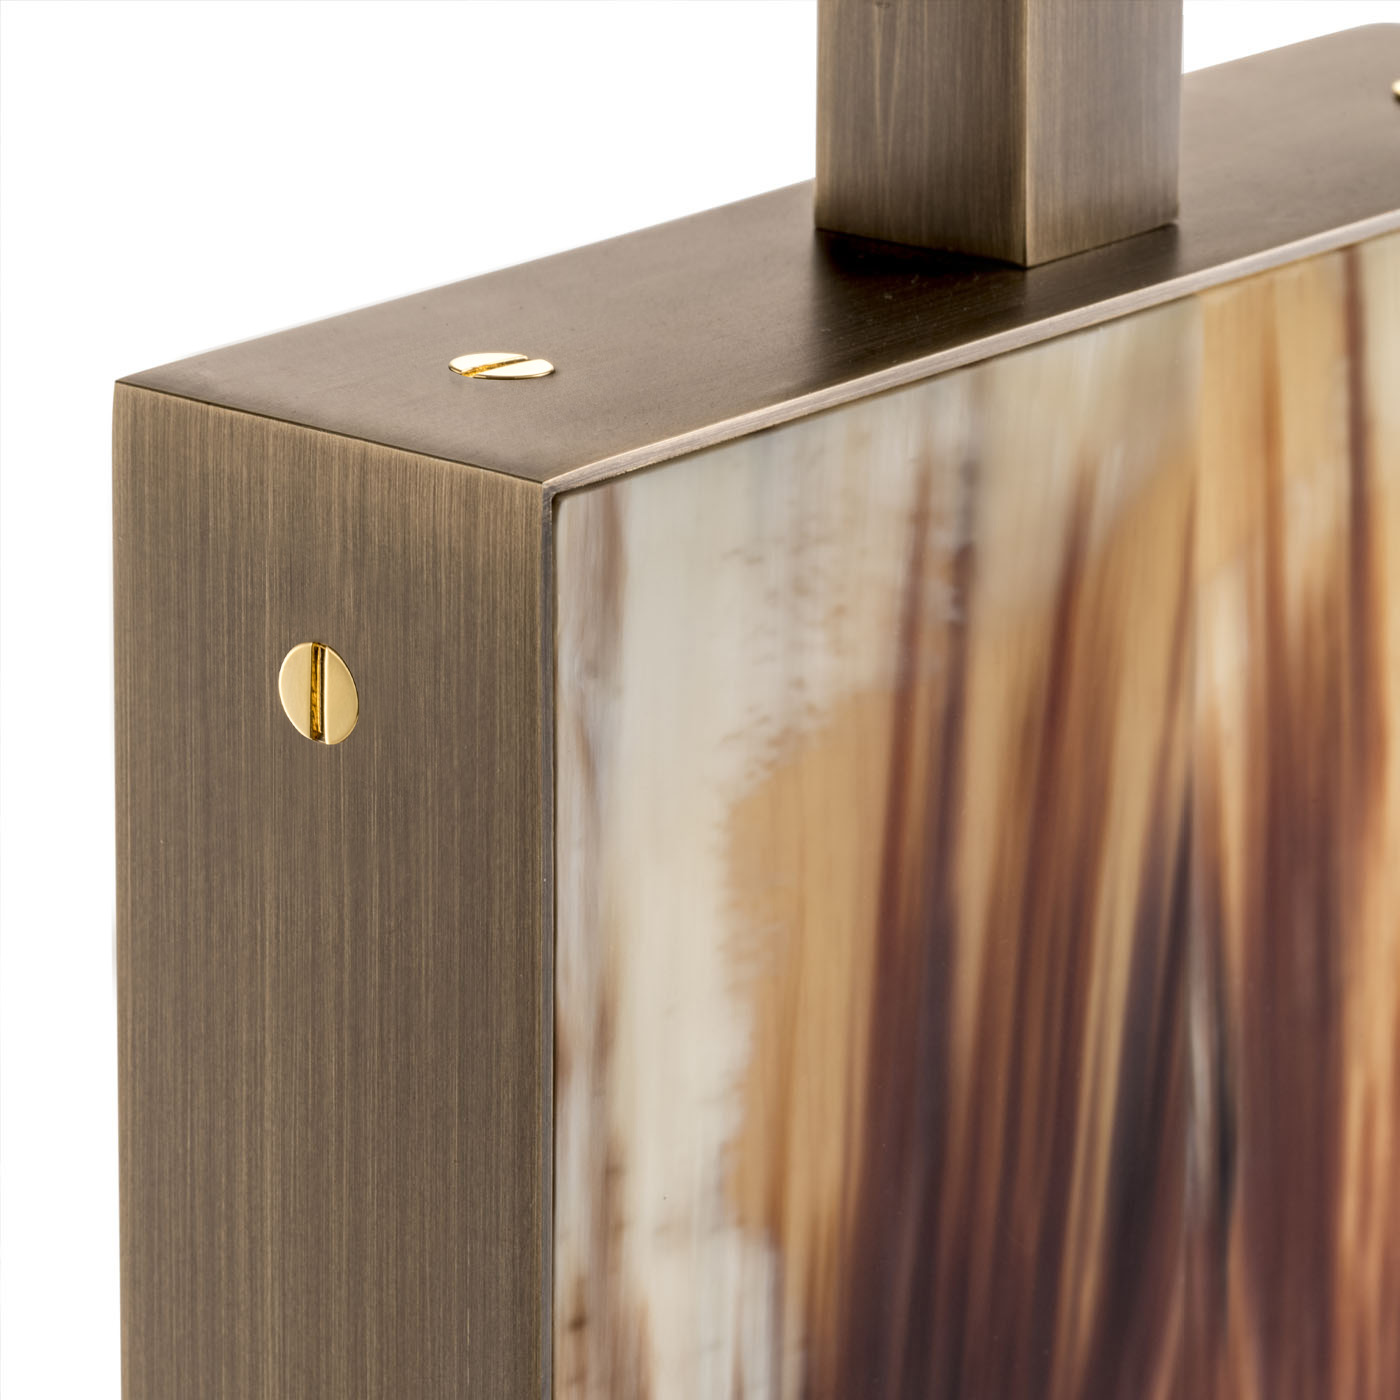 Lamps - Florian table lamp in horn and burnished brass - detail - Arcahorn